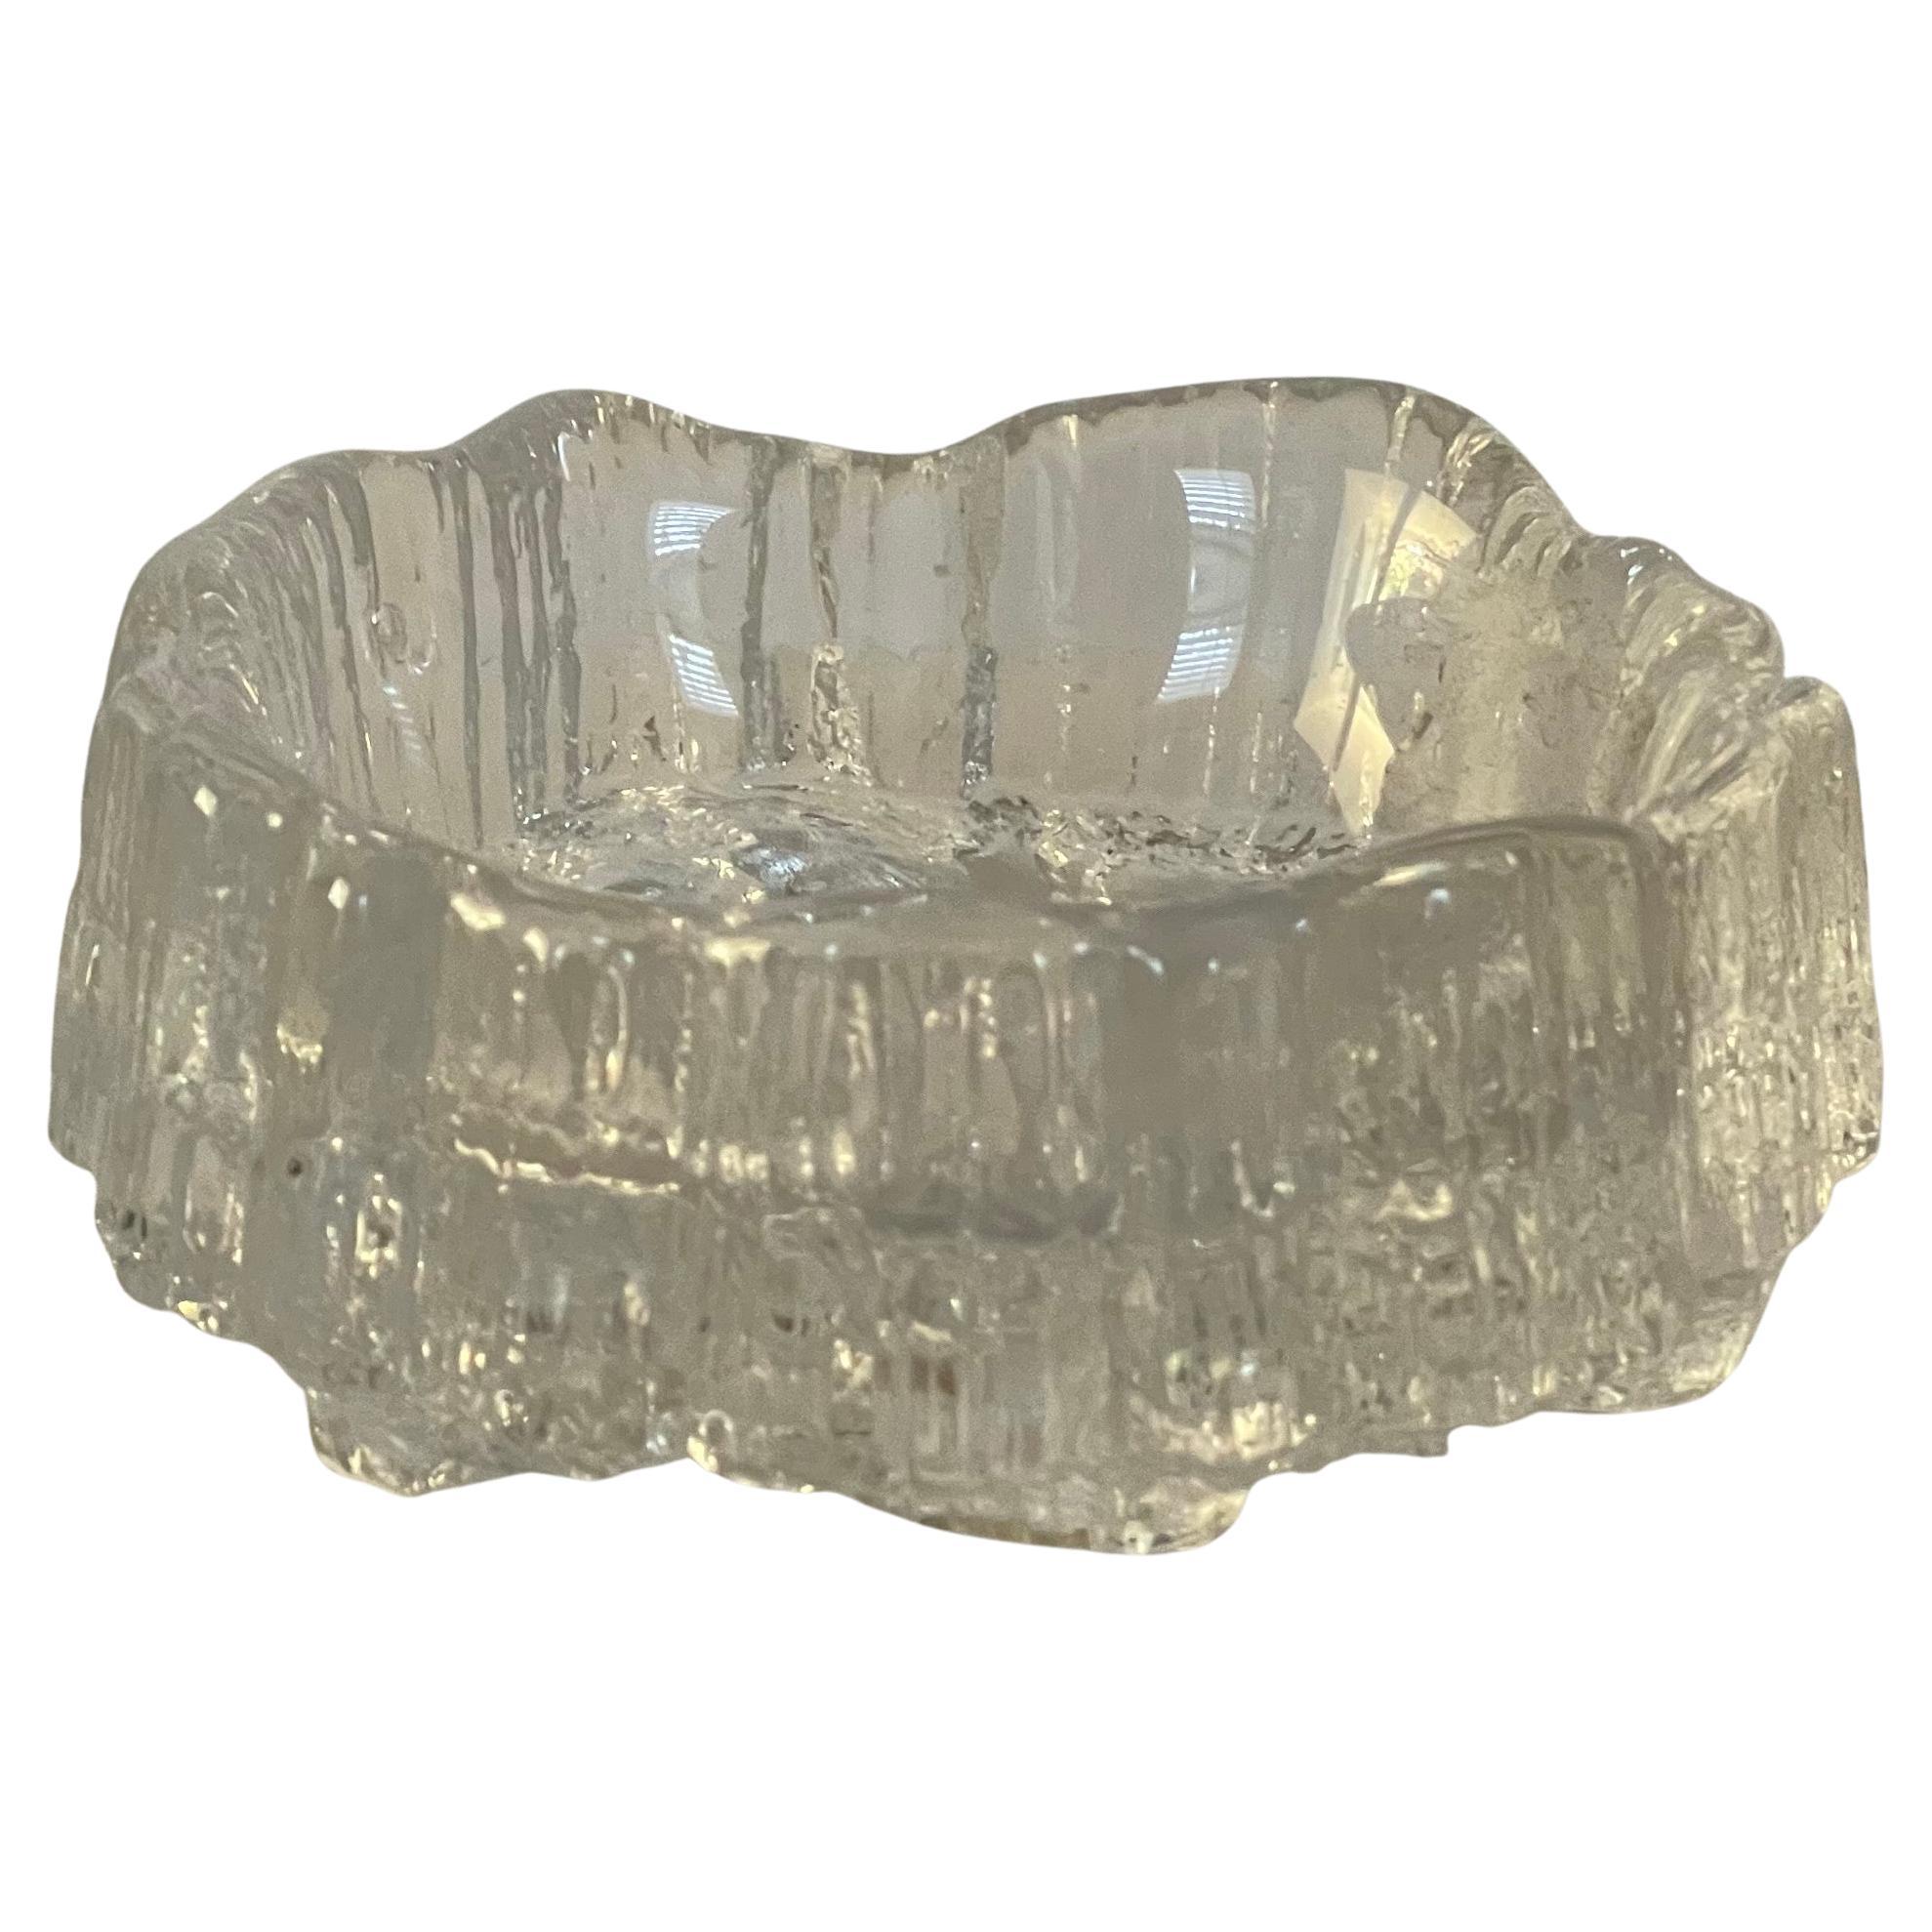 Gorgeous freeform crystal iceberg ashtray / catch all by Tapio Wirkkala for Iittala Finland, circa 1980s. The piece is in very good vintage condition with no chips or cracks and measures a 5